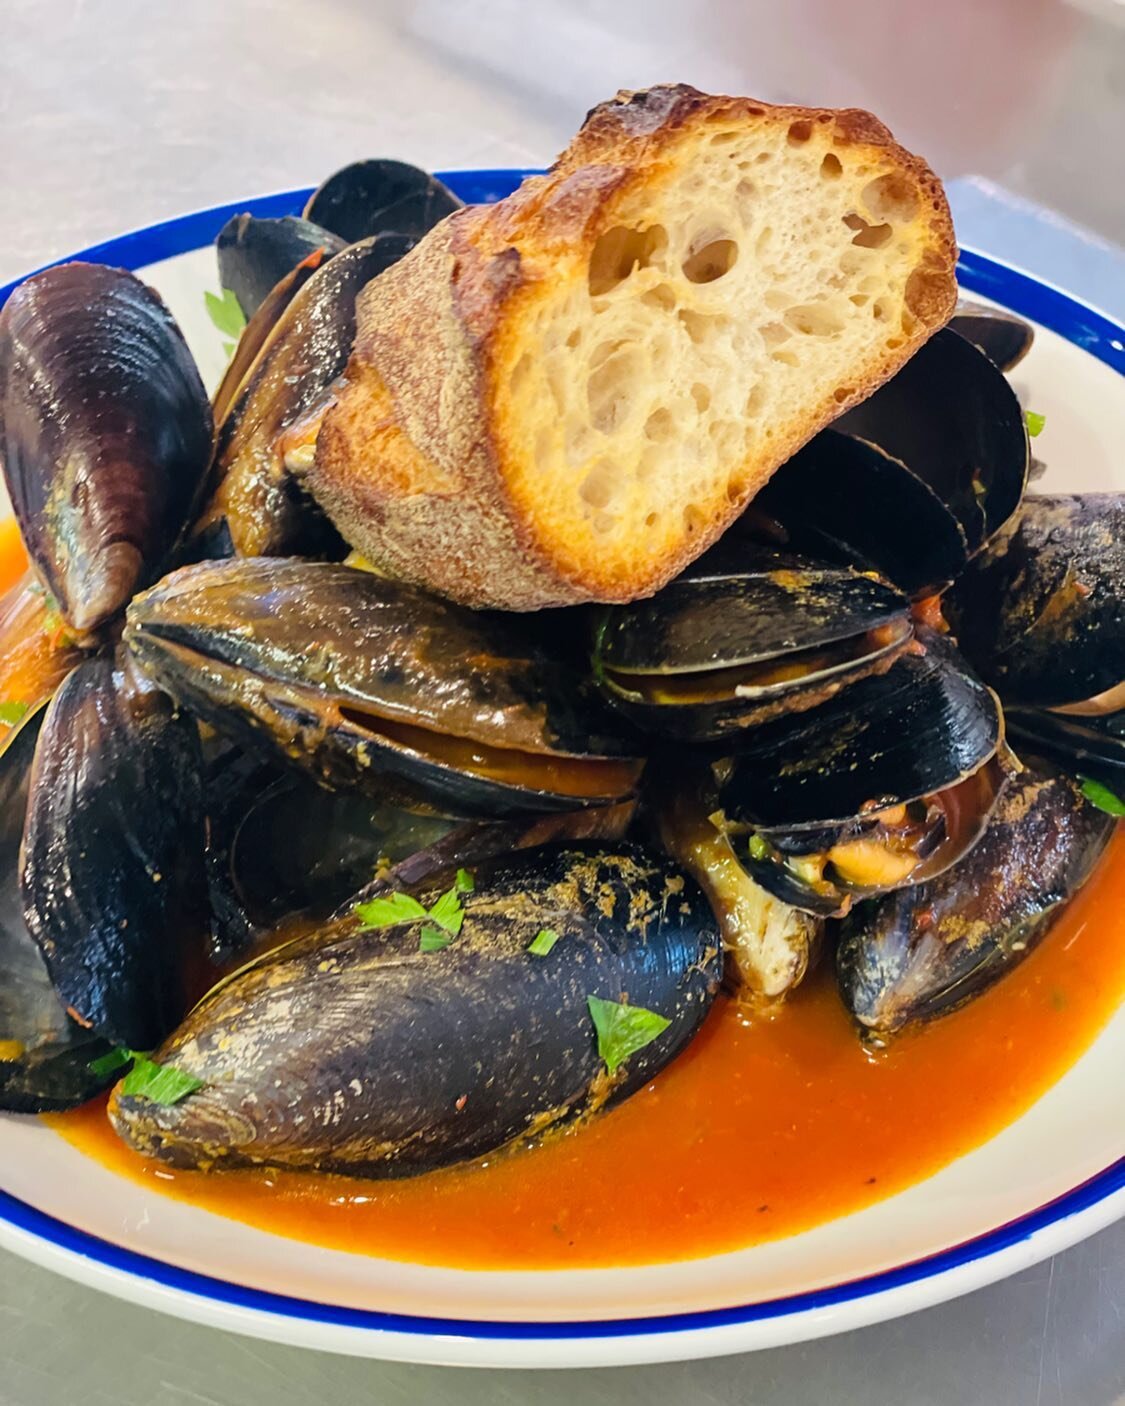 Steamed @springbaymussels with tomato and saffron